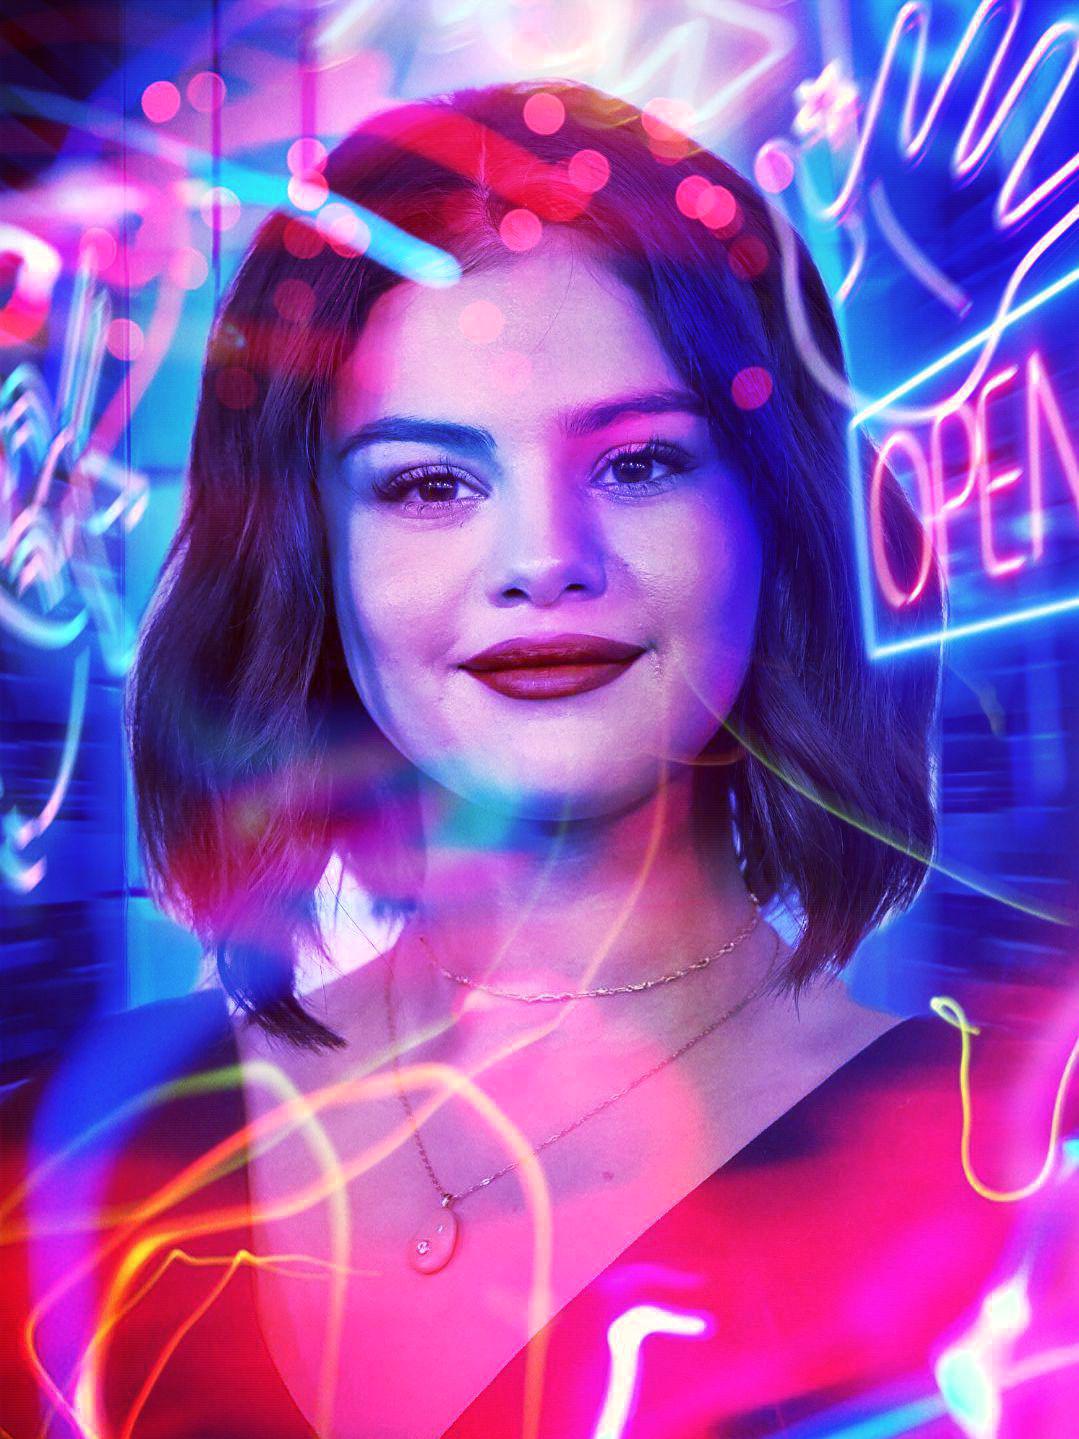 Barely Legal Ladyboy Fucked - Selena Gomez - December Giveaway! - Celeb ART - Beautiful Artworks of  Celebrities, Footballers, Politicians and Famous People in World | OpenSea